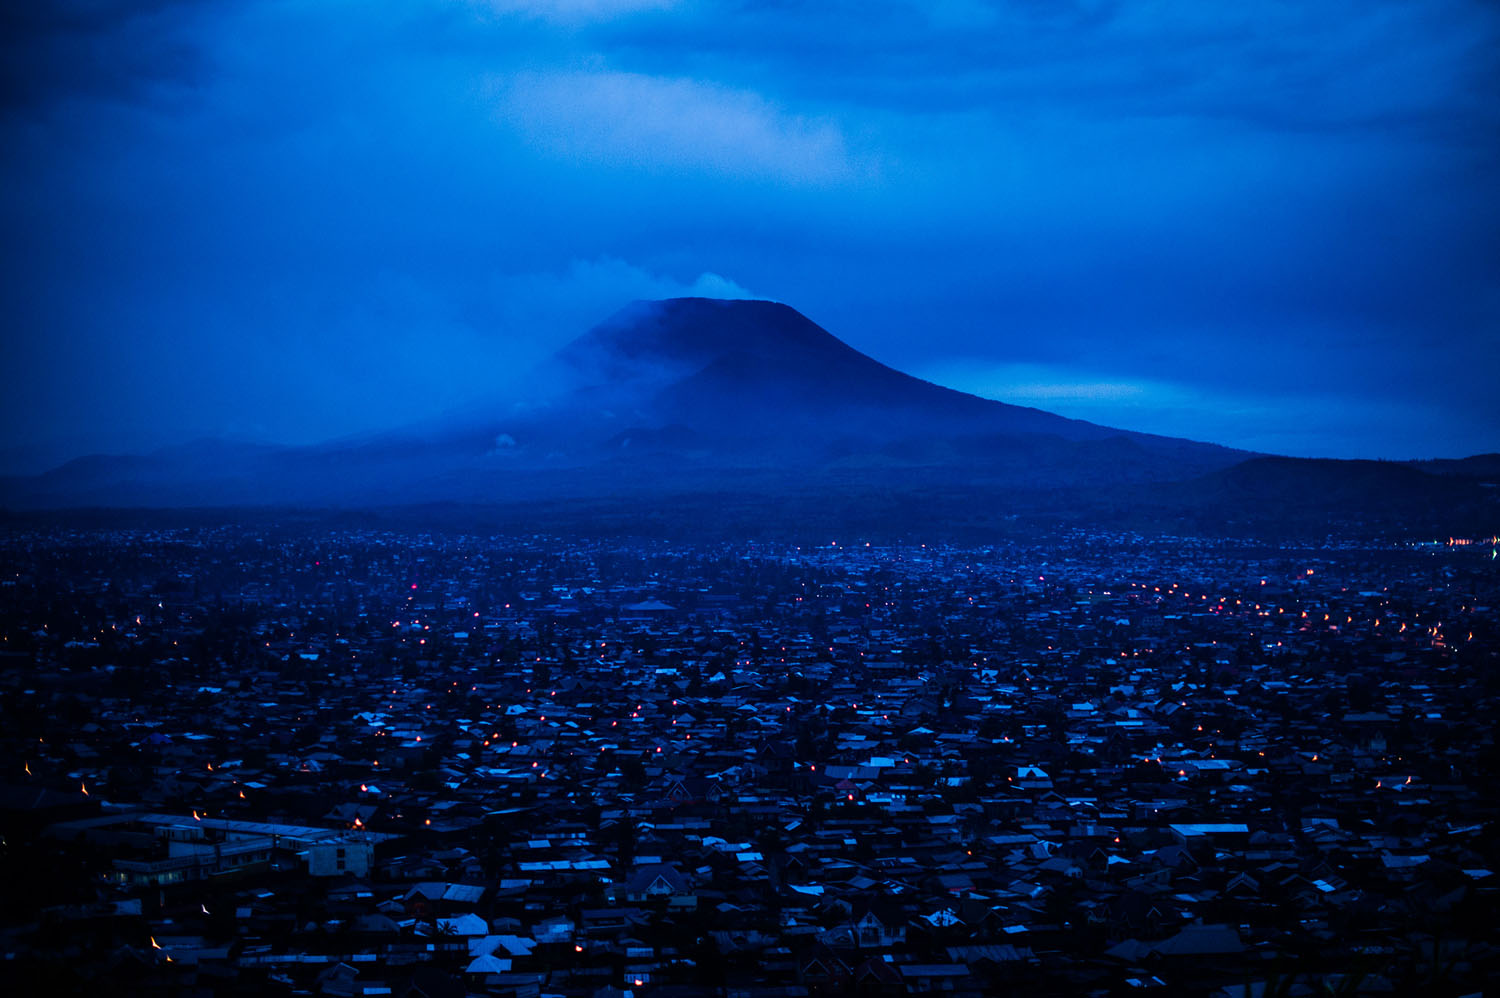 The city of Goma lies at the foot of Mount Nyiragongo, an active volcano situated around 20km from the city, as seen in the evening of November 1, 2013 in the east of the Democratic Republic of the Congo. Mount Nyiragongo last erupted in 2002, destroying around 15% of the city, leaving some 120,000 people homeless.